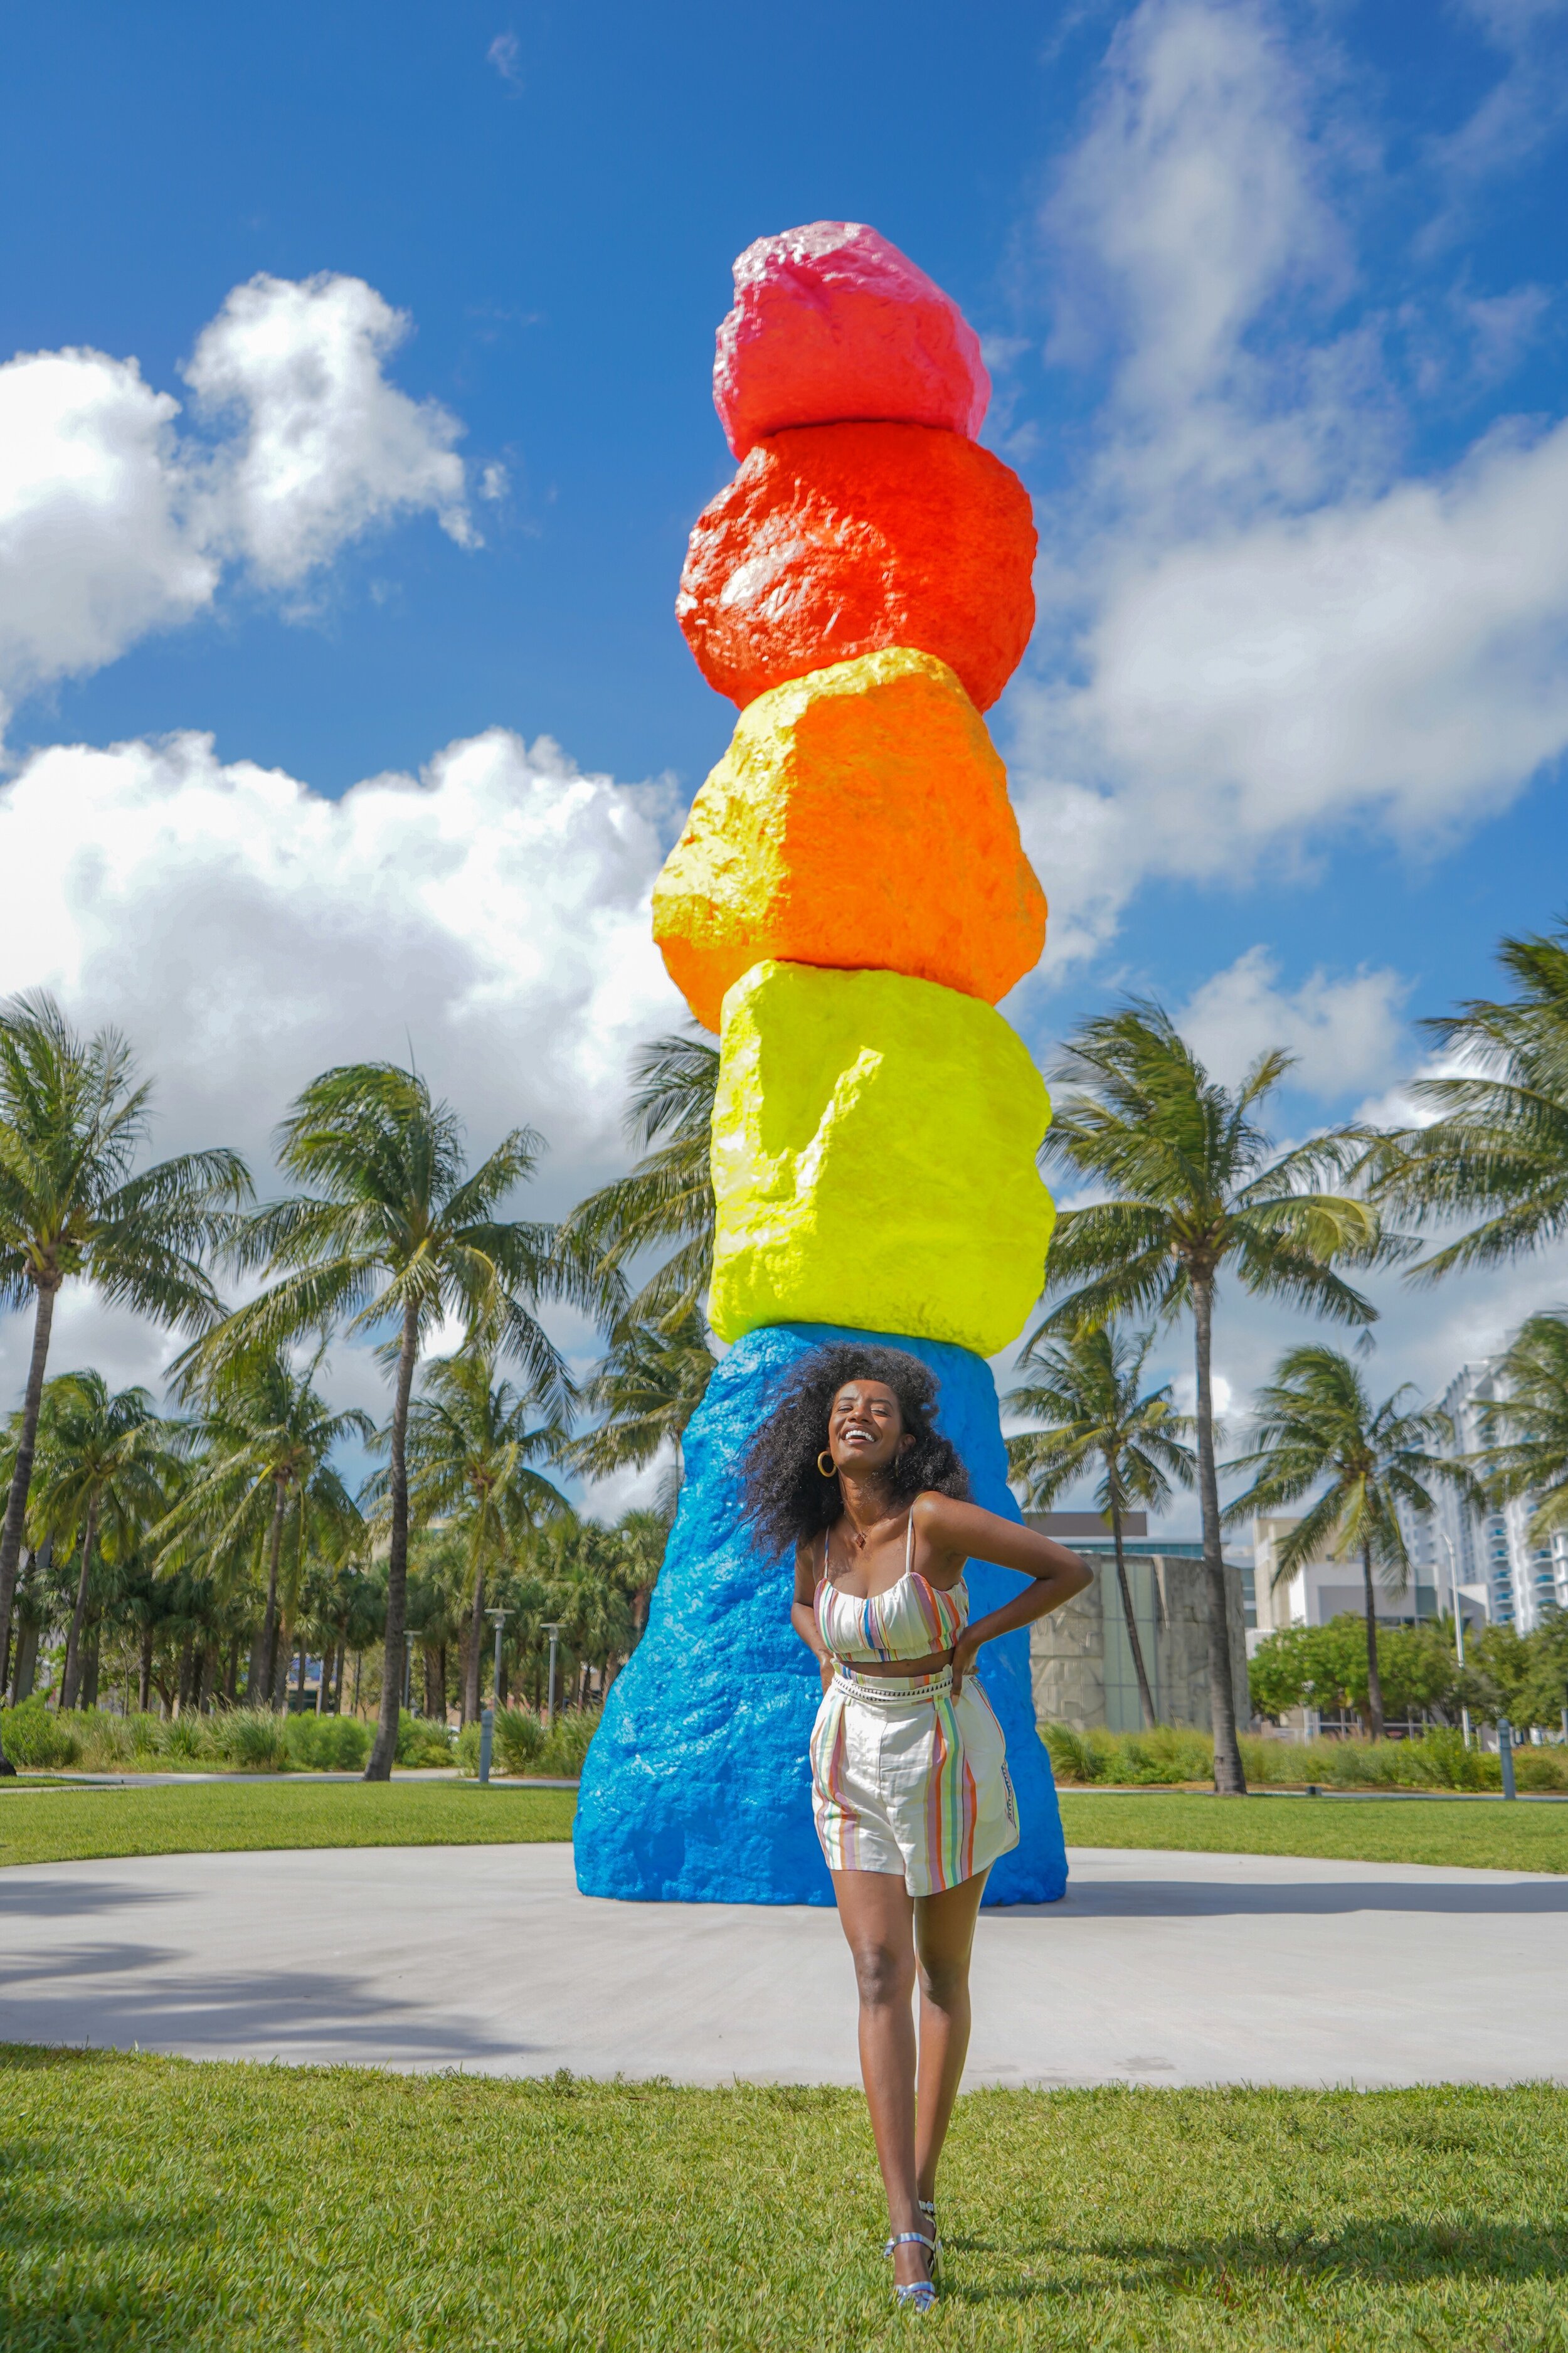 Miami's 12 Most Photographic and Instagrammable Spots